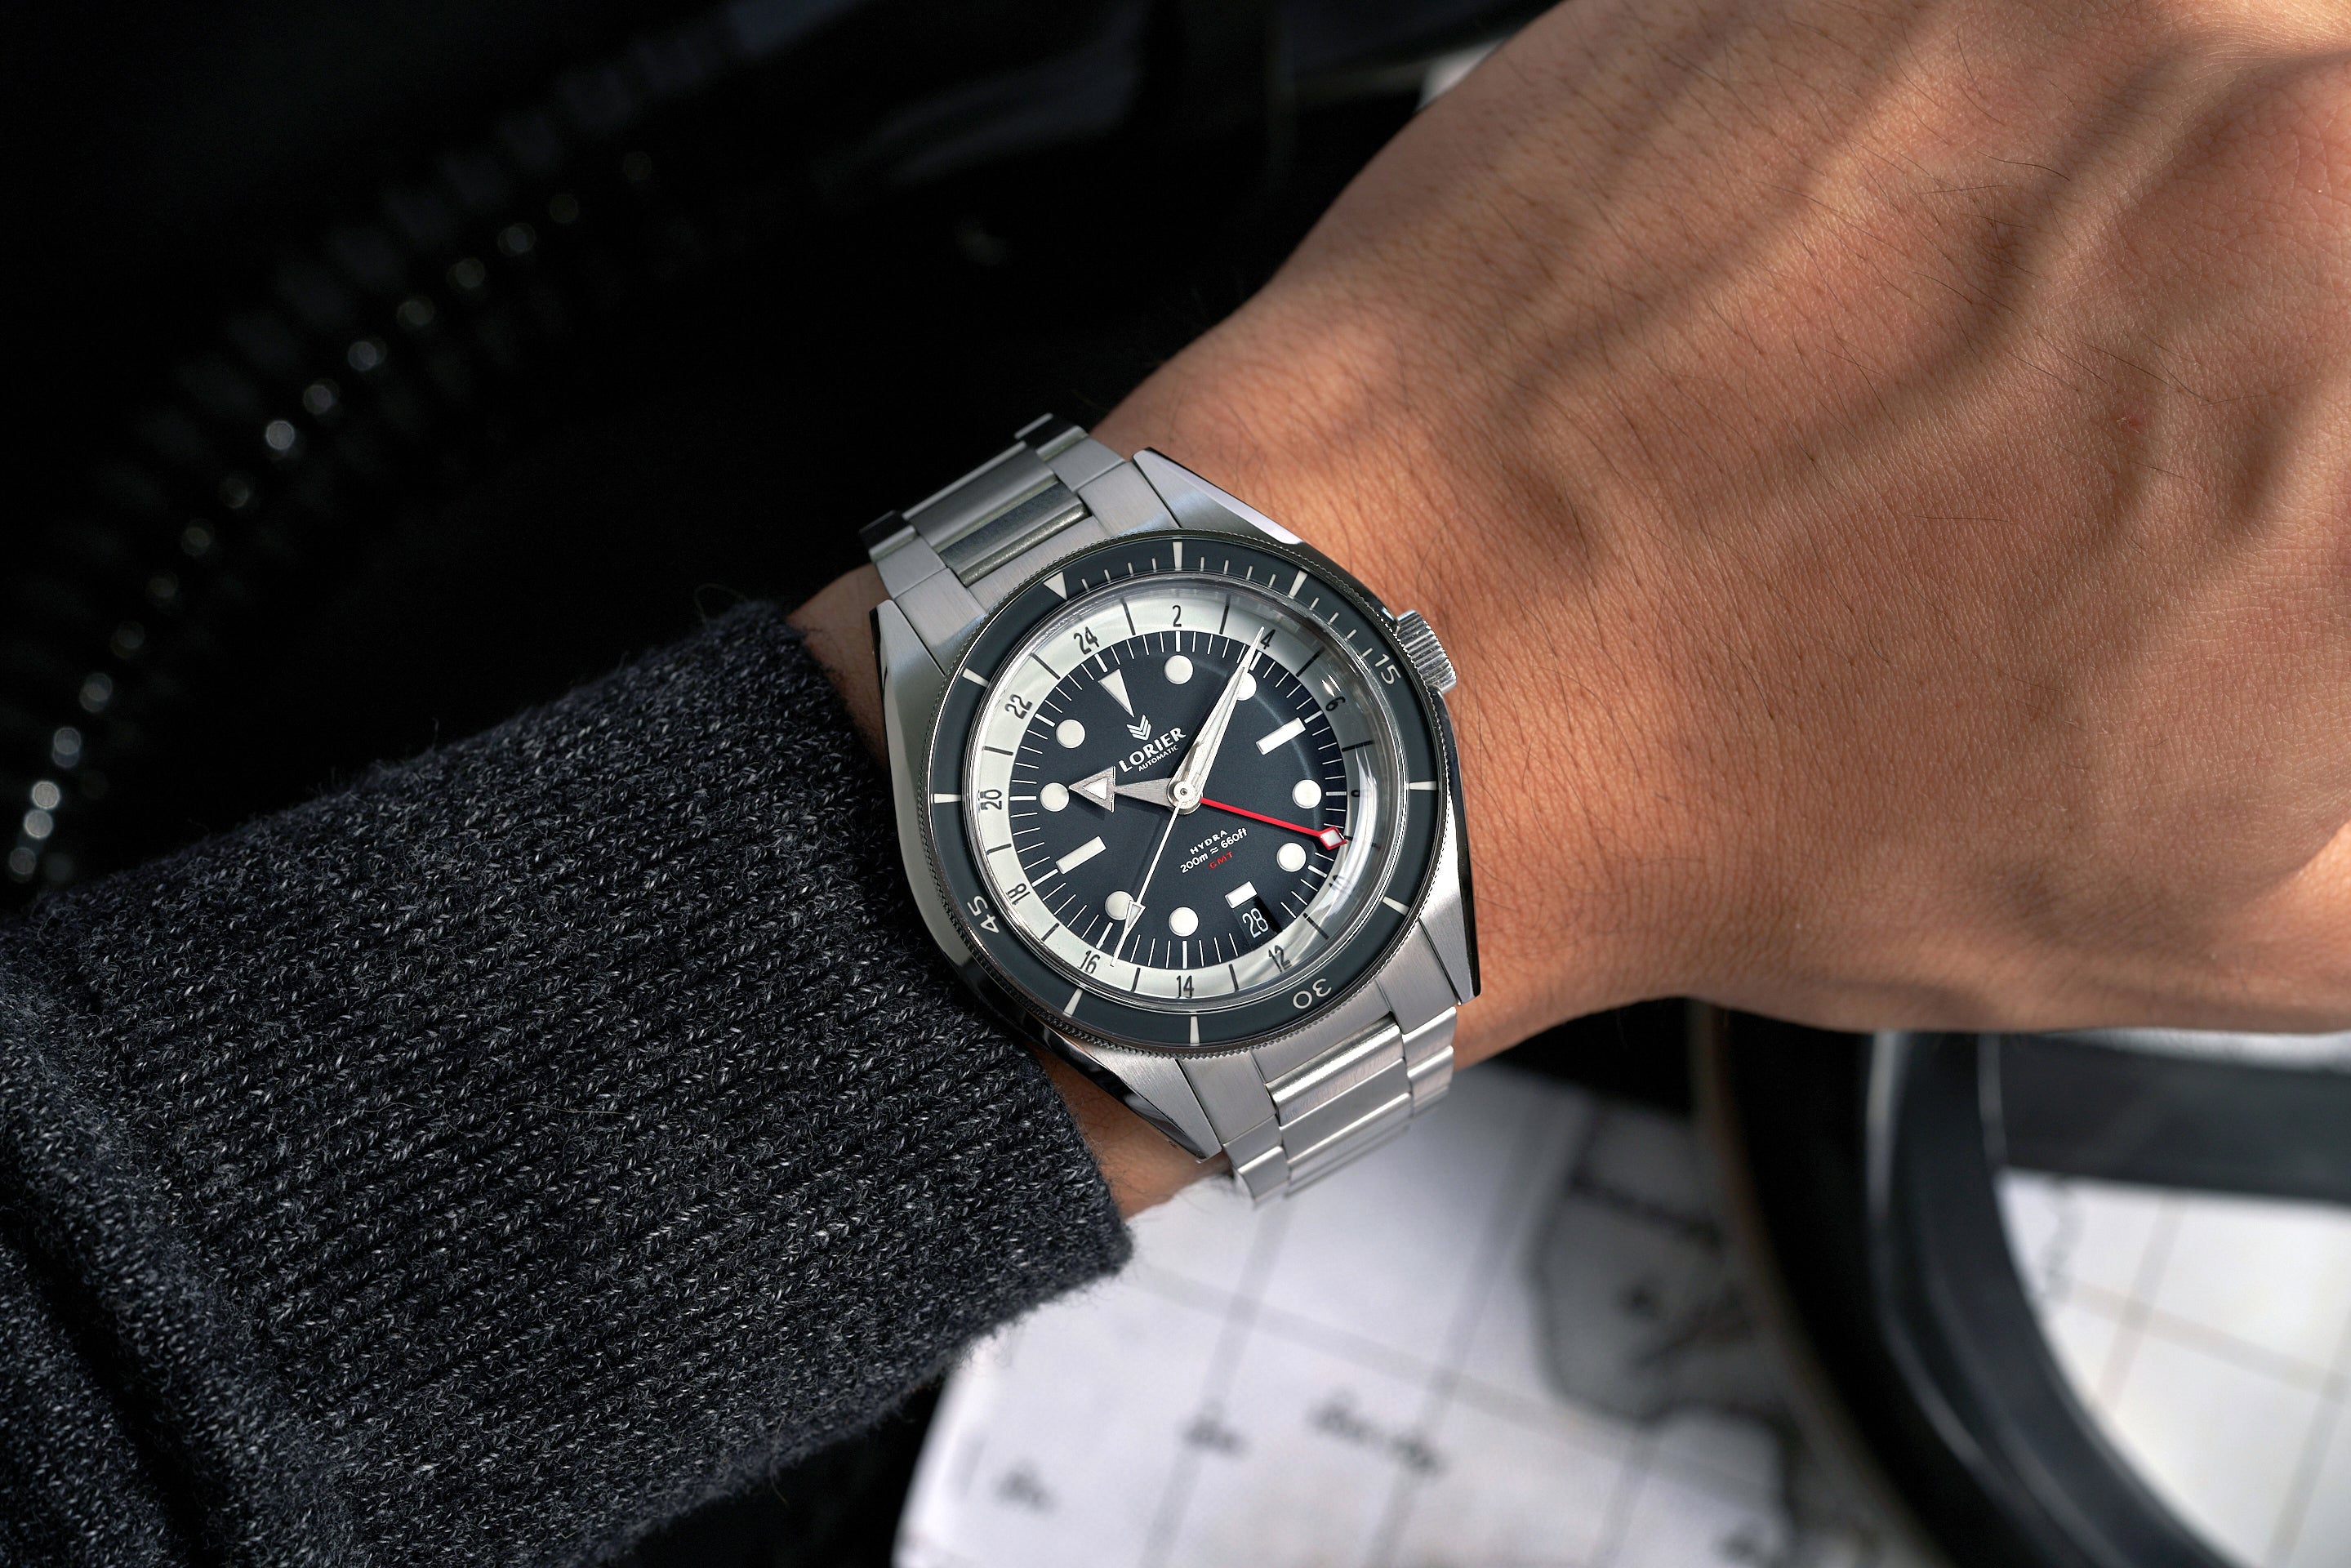 New Lorier GMT/Diver thing - The Dive Watch Connection